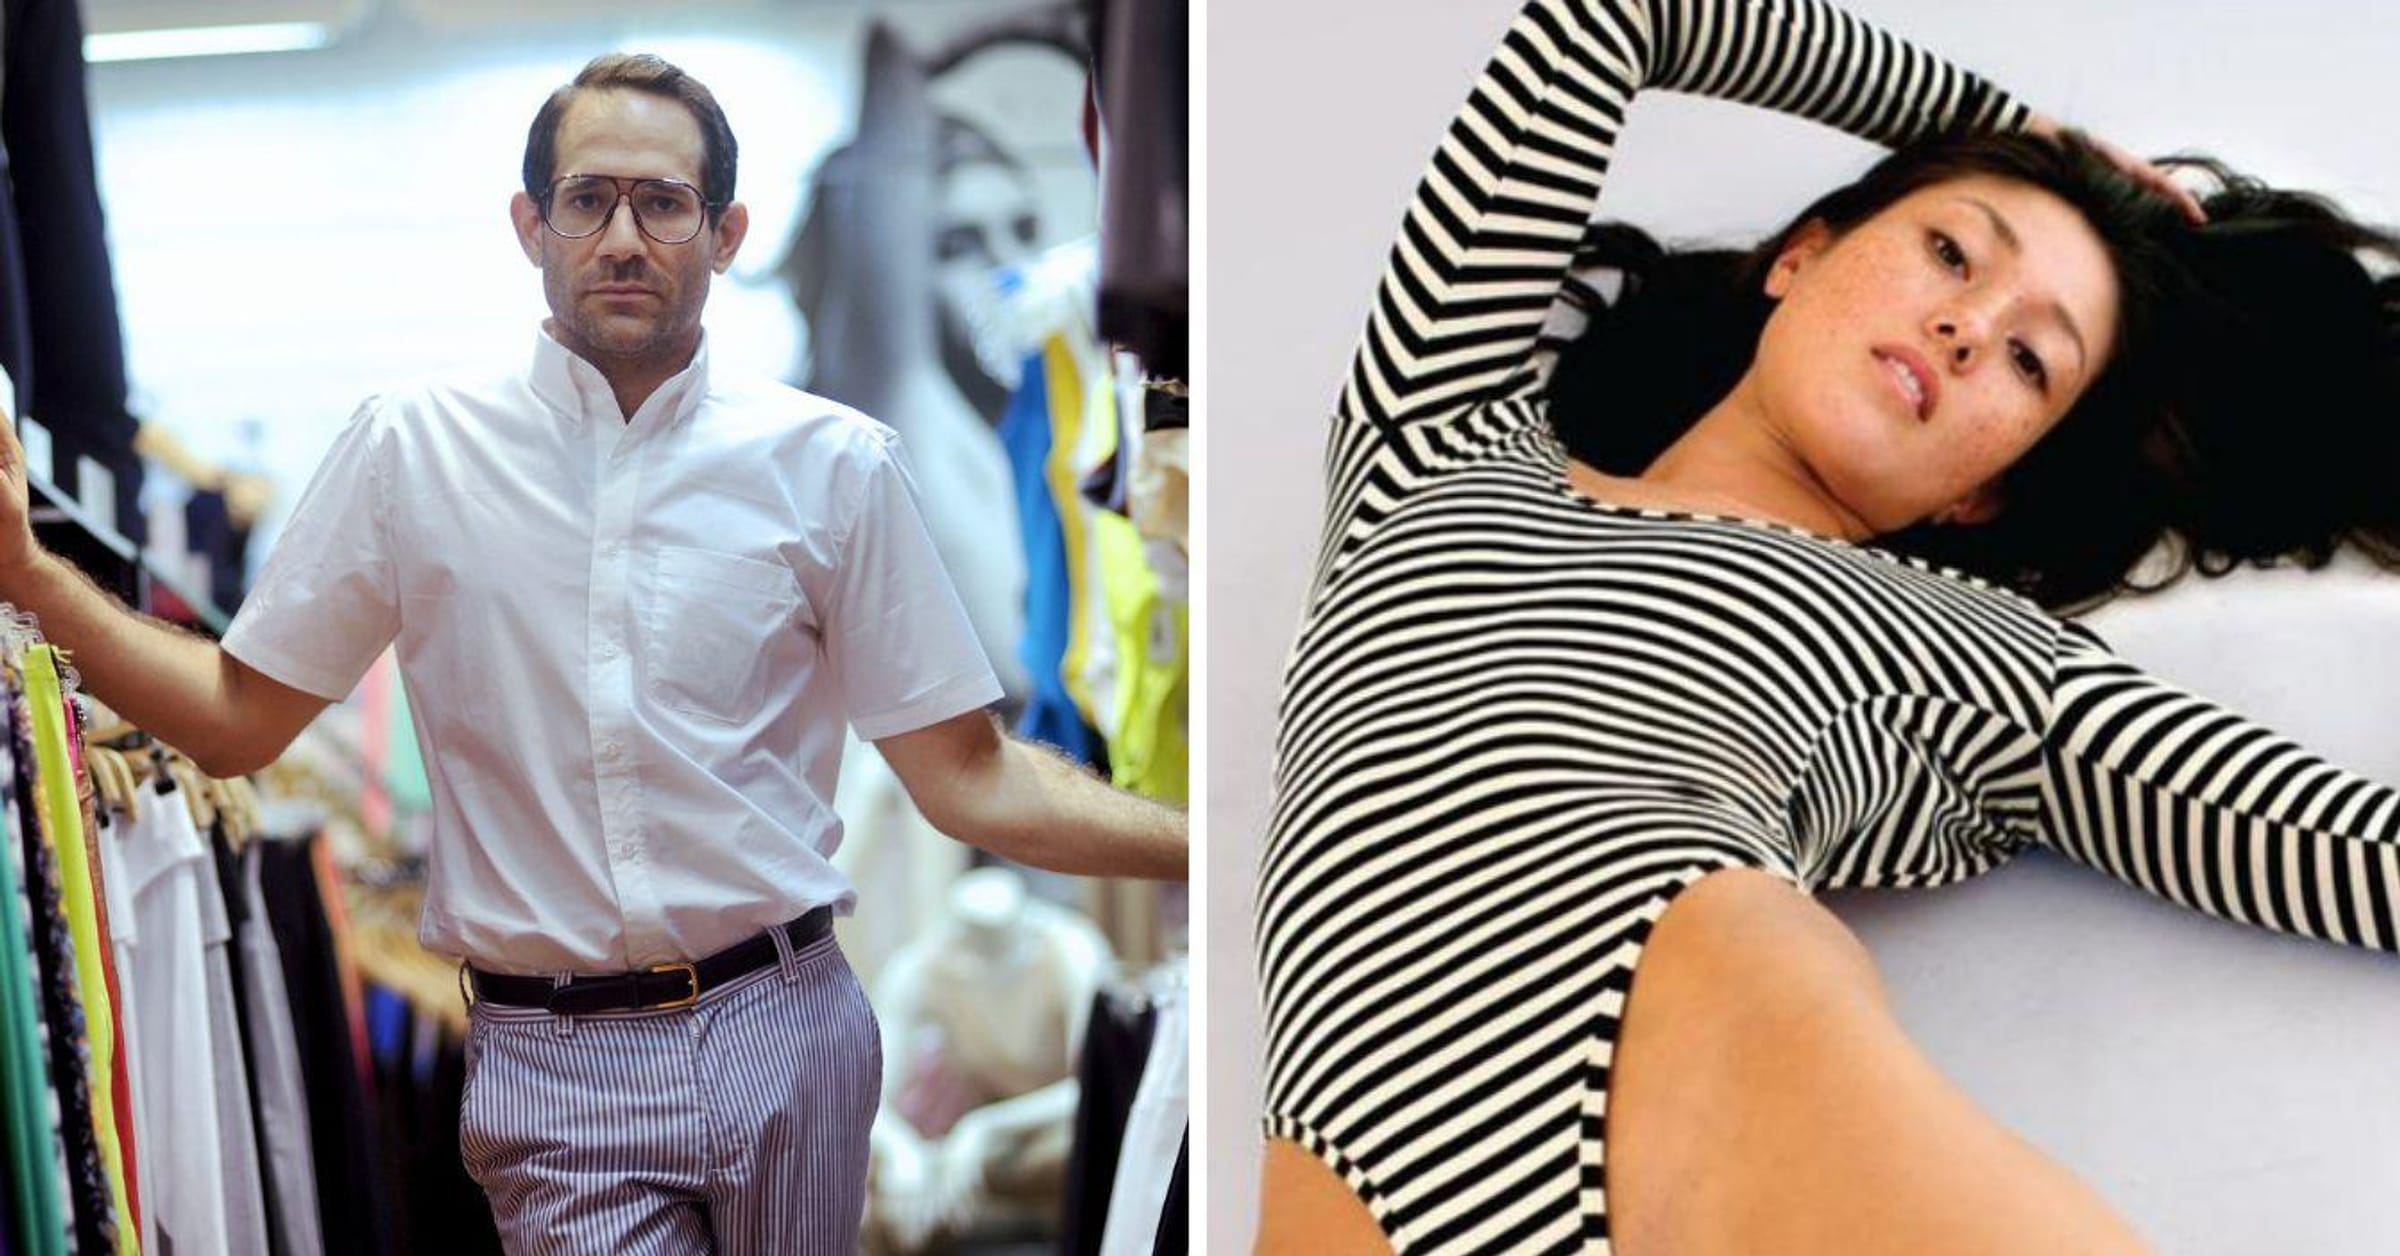 American Apparel Employee Rules That Are Outright Insane And Often